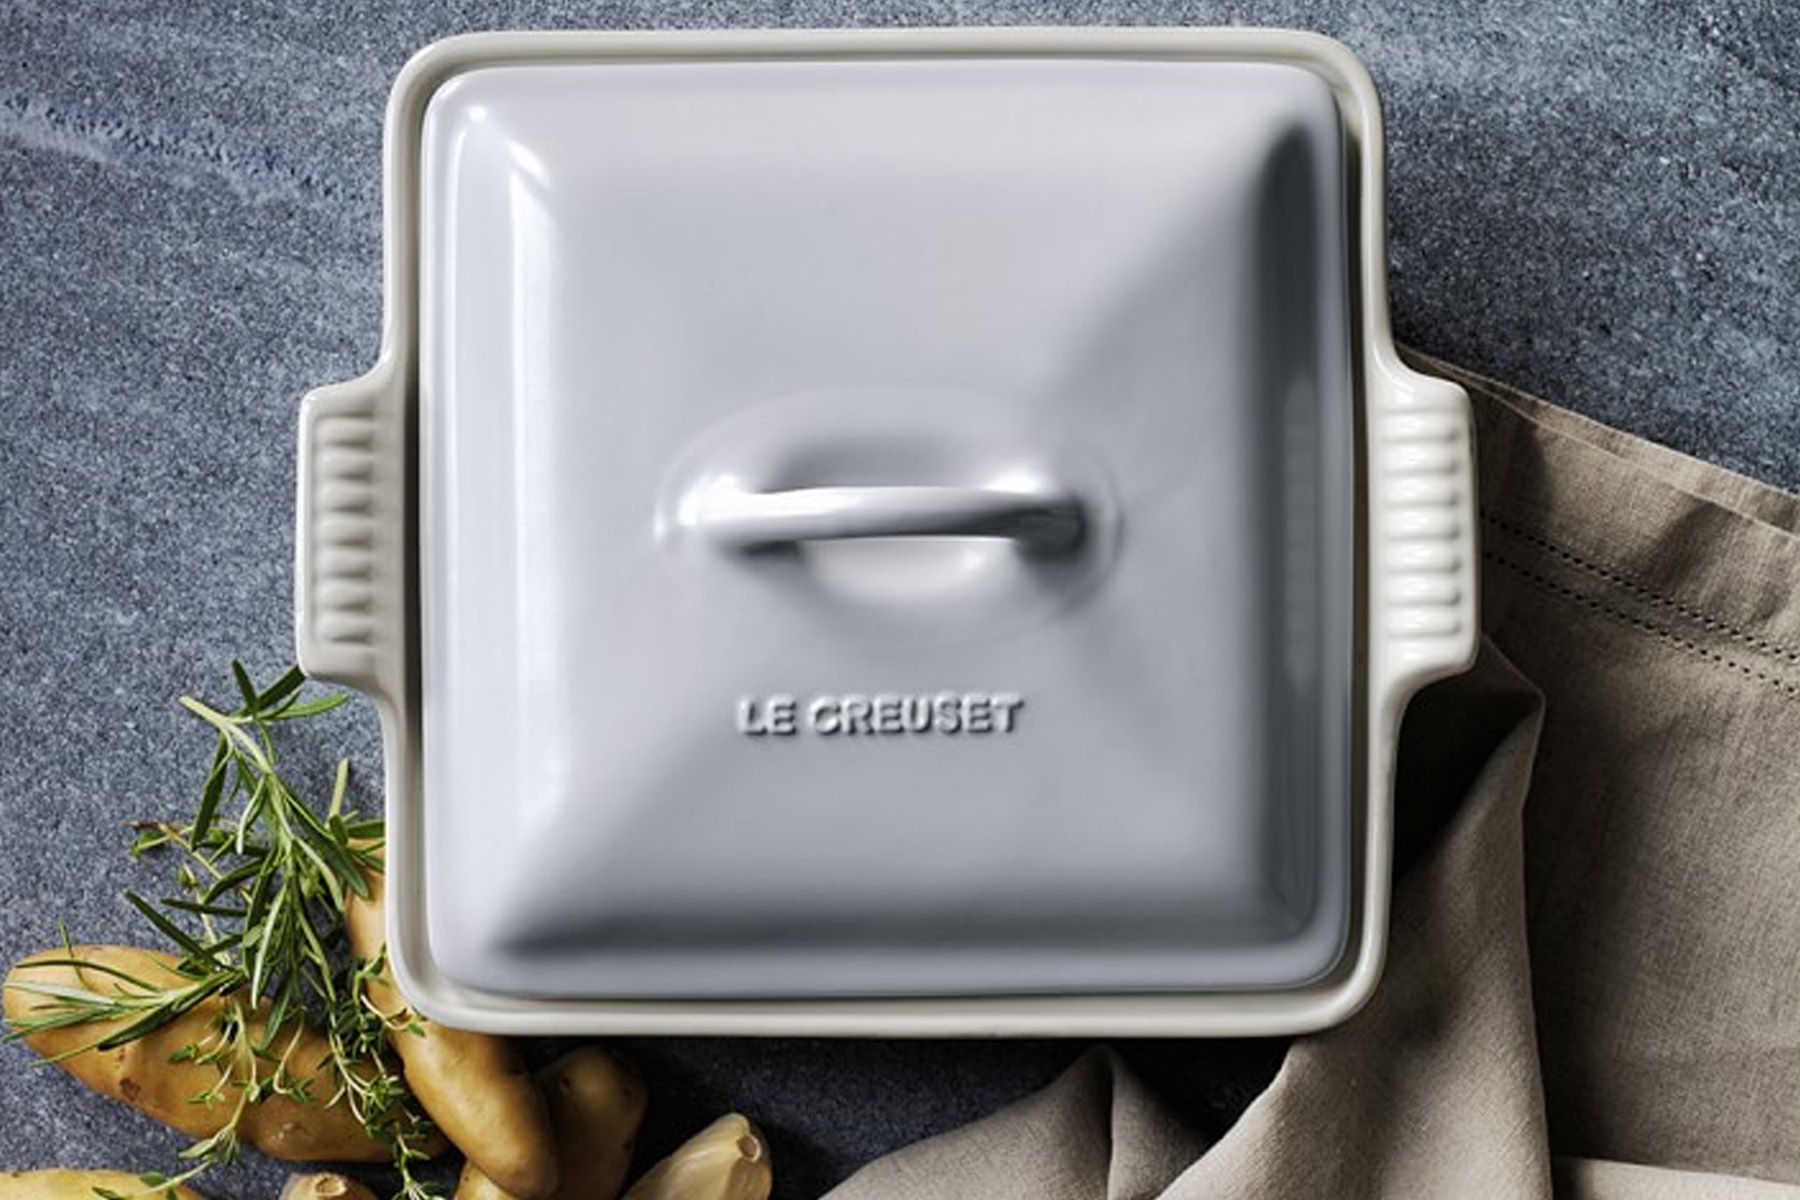 Williams-Sonoma Is Have a Huge Le Creuset Sale Right Now